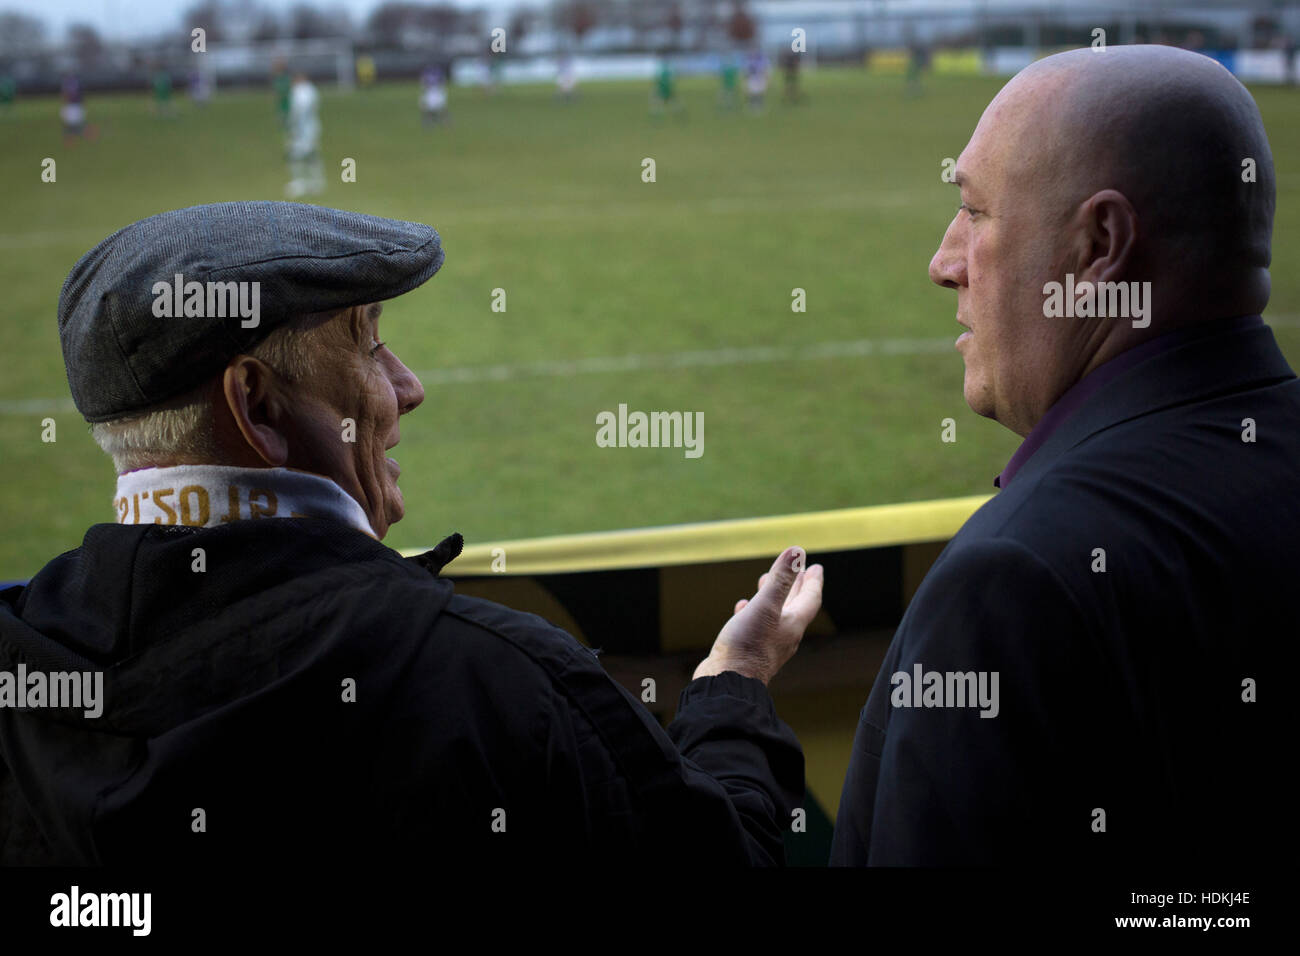 Two home supporters chatting during the first-half at the Delta Taxis Stadium, Bootle, Merseyside as City of Liverpool hosted Holker Old Boys in a North West Counties League division one match. Founded in 2015, and aiming to be the premier non-League club in Liverpool, City were admitted to the League at the start of the 2016-17 season and were using Bootle FC's ground for home matches. A 6-1 victory over their visitors took 'the Purps' to the top of the division, in a match watched by 483 spectators. Stock Photo